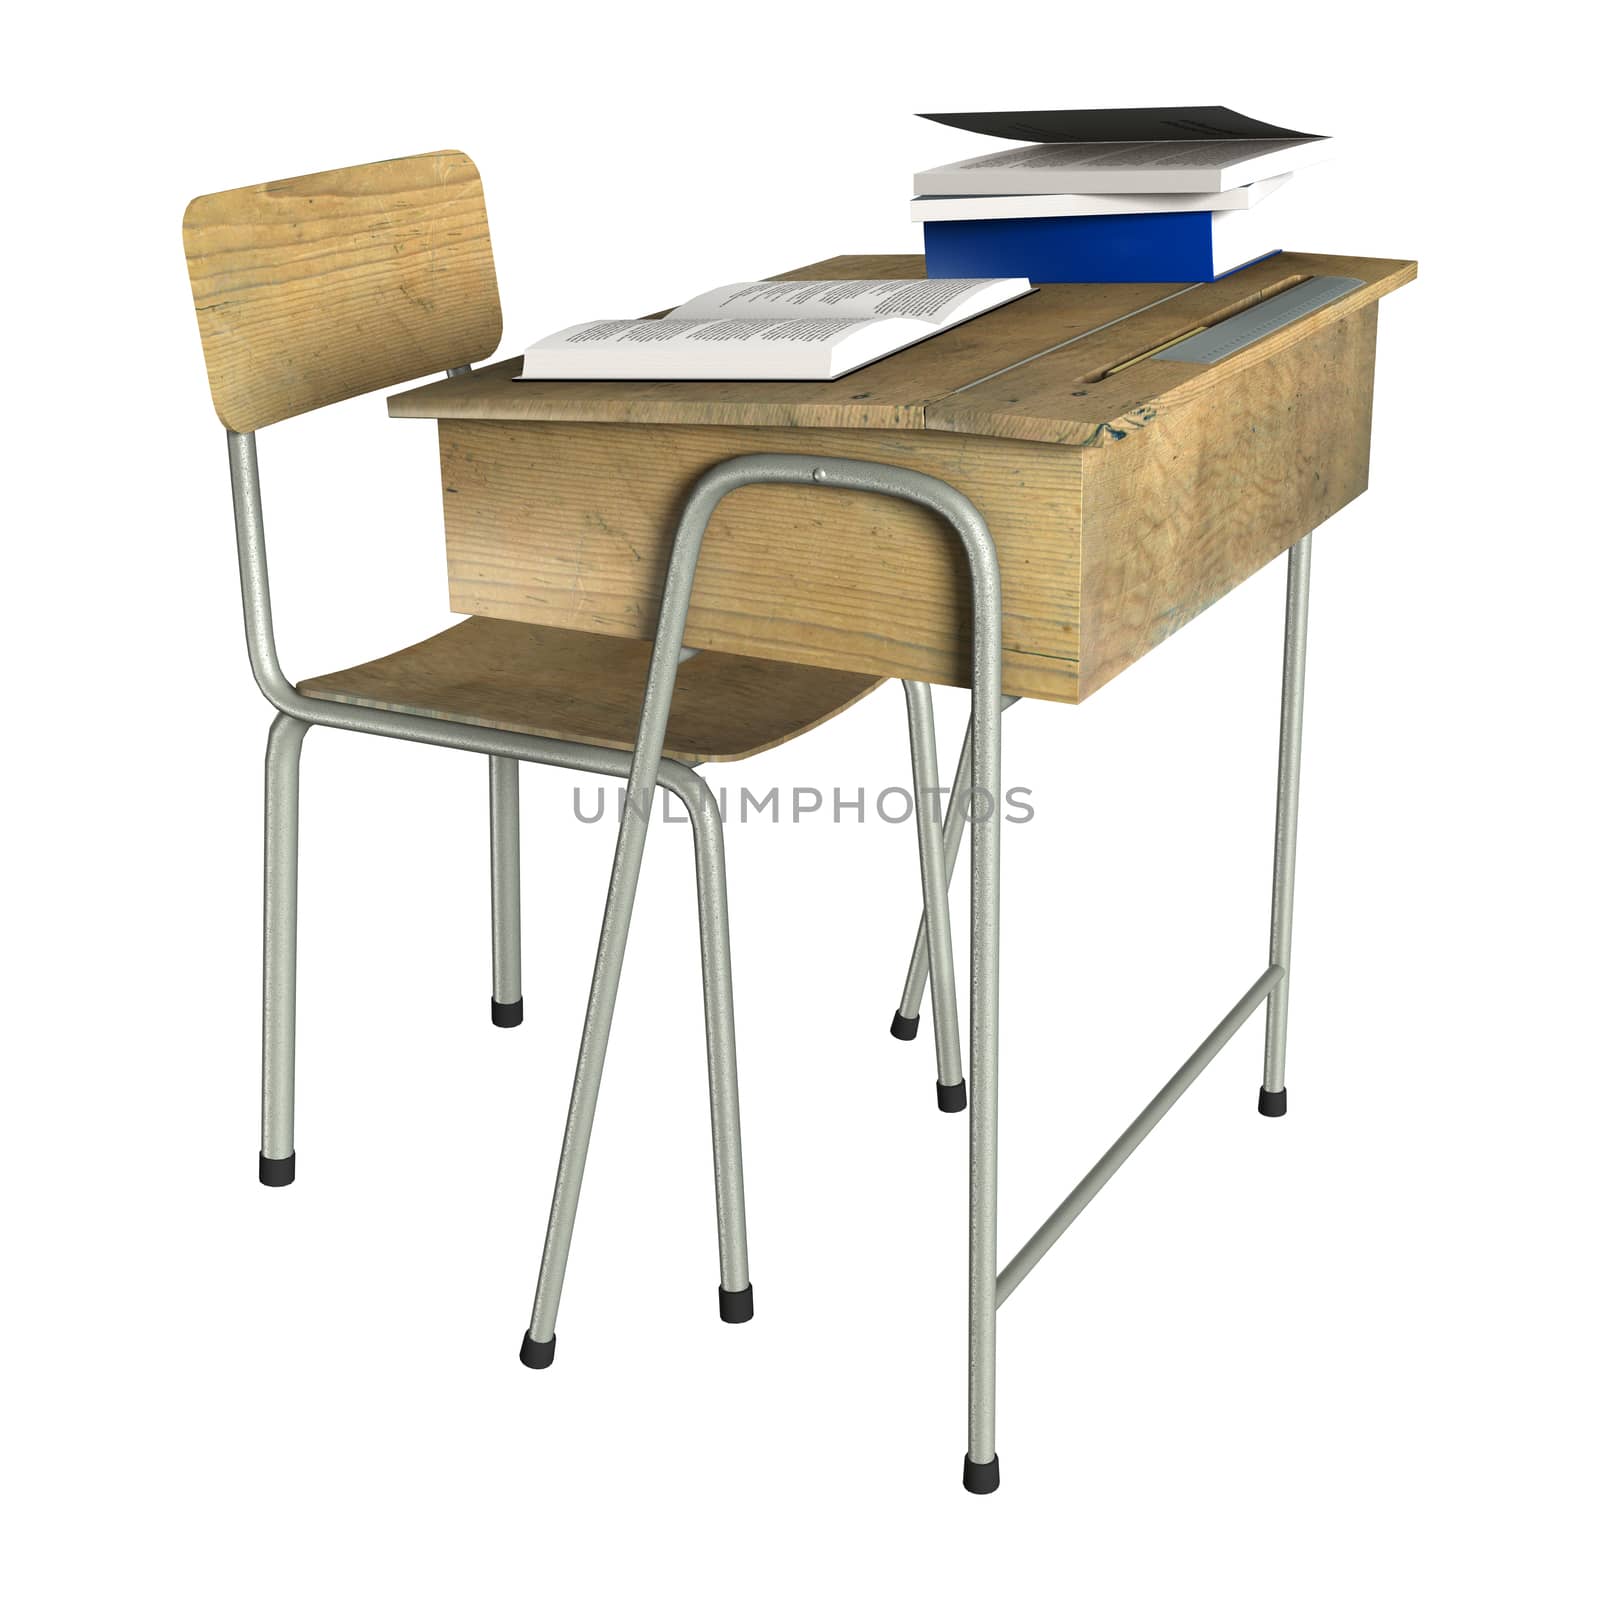 3D digital render of a wooden school desk with books on it isolated on white background